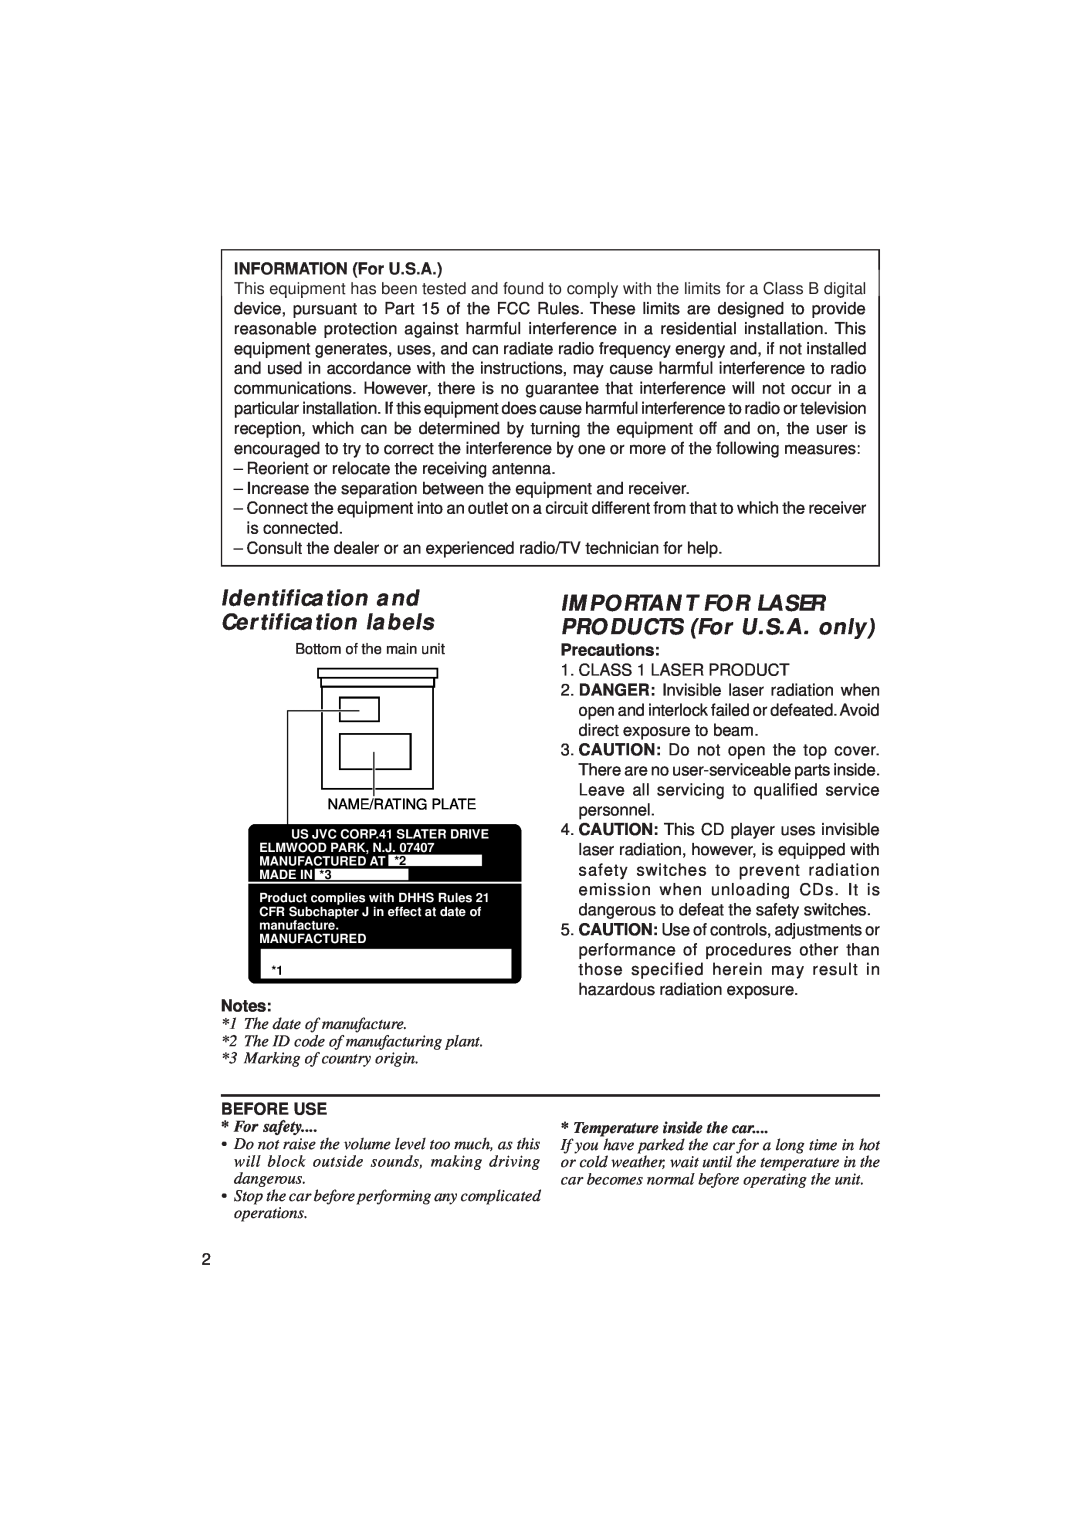 JVC KD-SX939/SX930 manual Identification and Certification labels, IMPORTANT FOR LASER PRODUCTS For U.S.A. only, Notes 